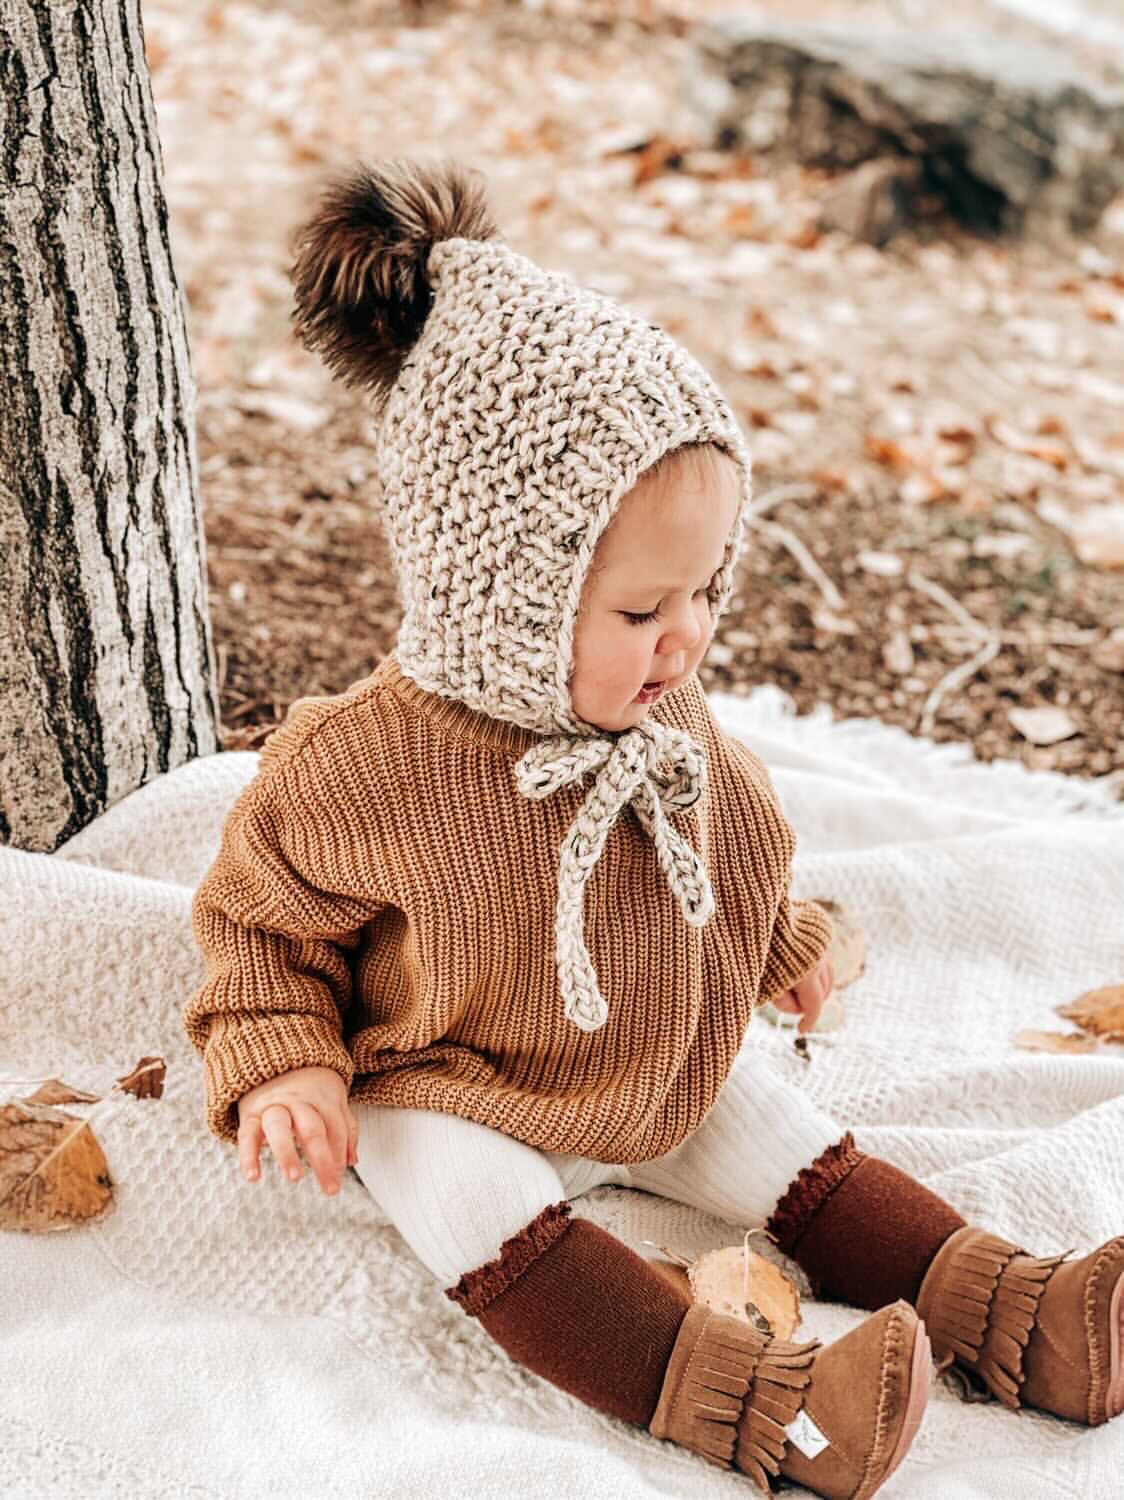 Brown Cozy Boot